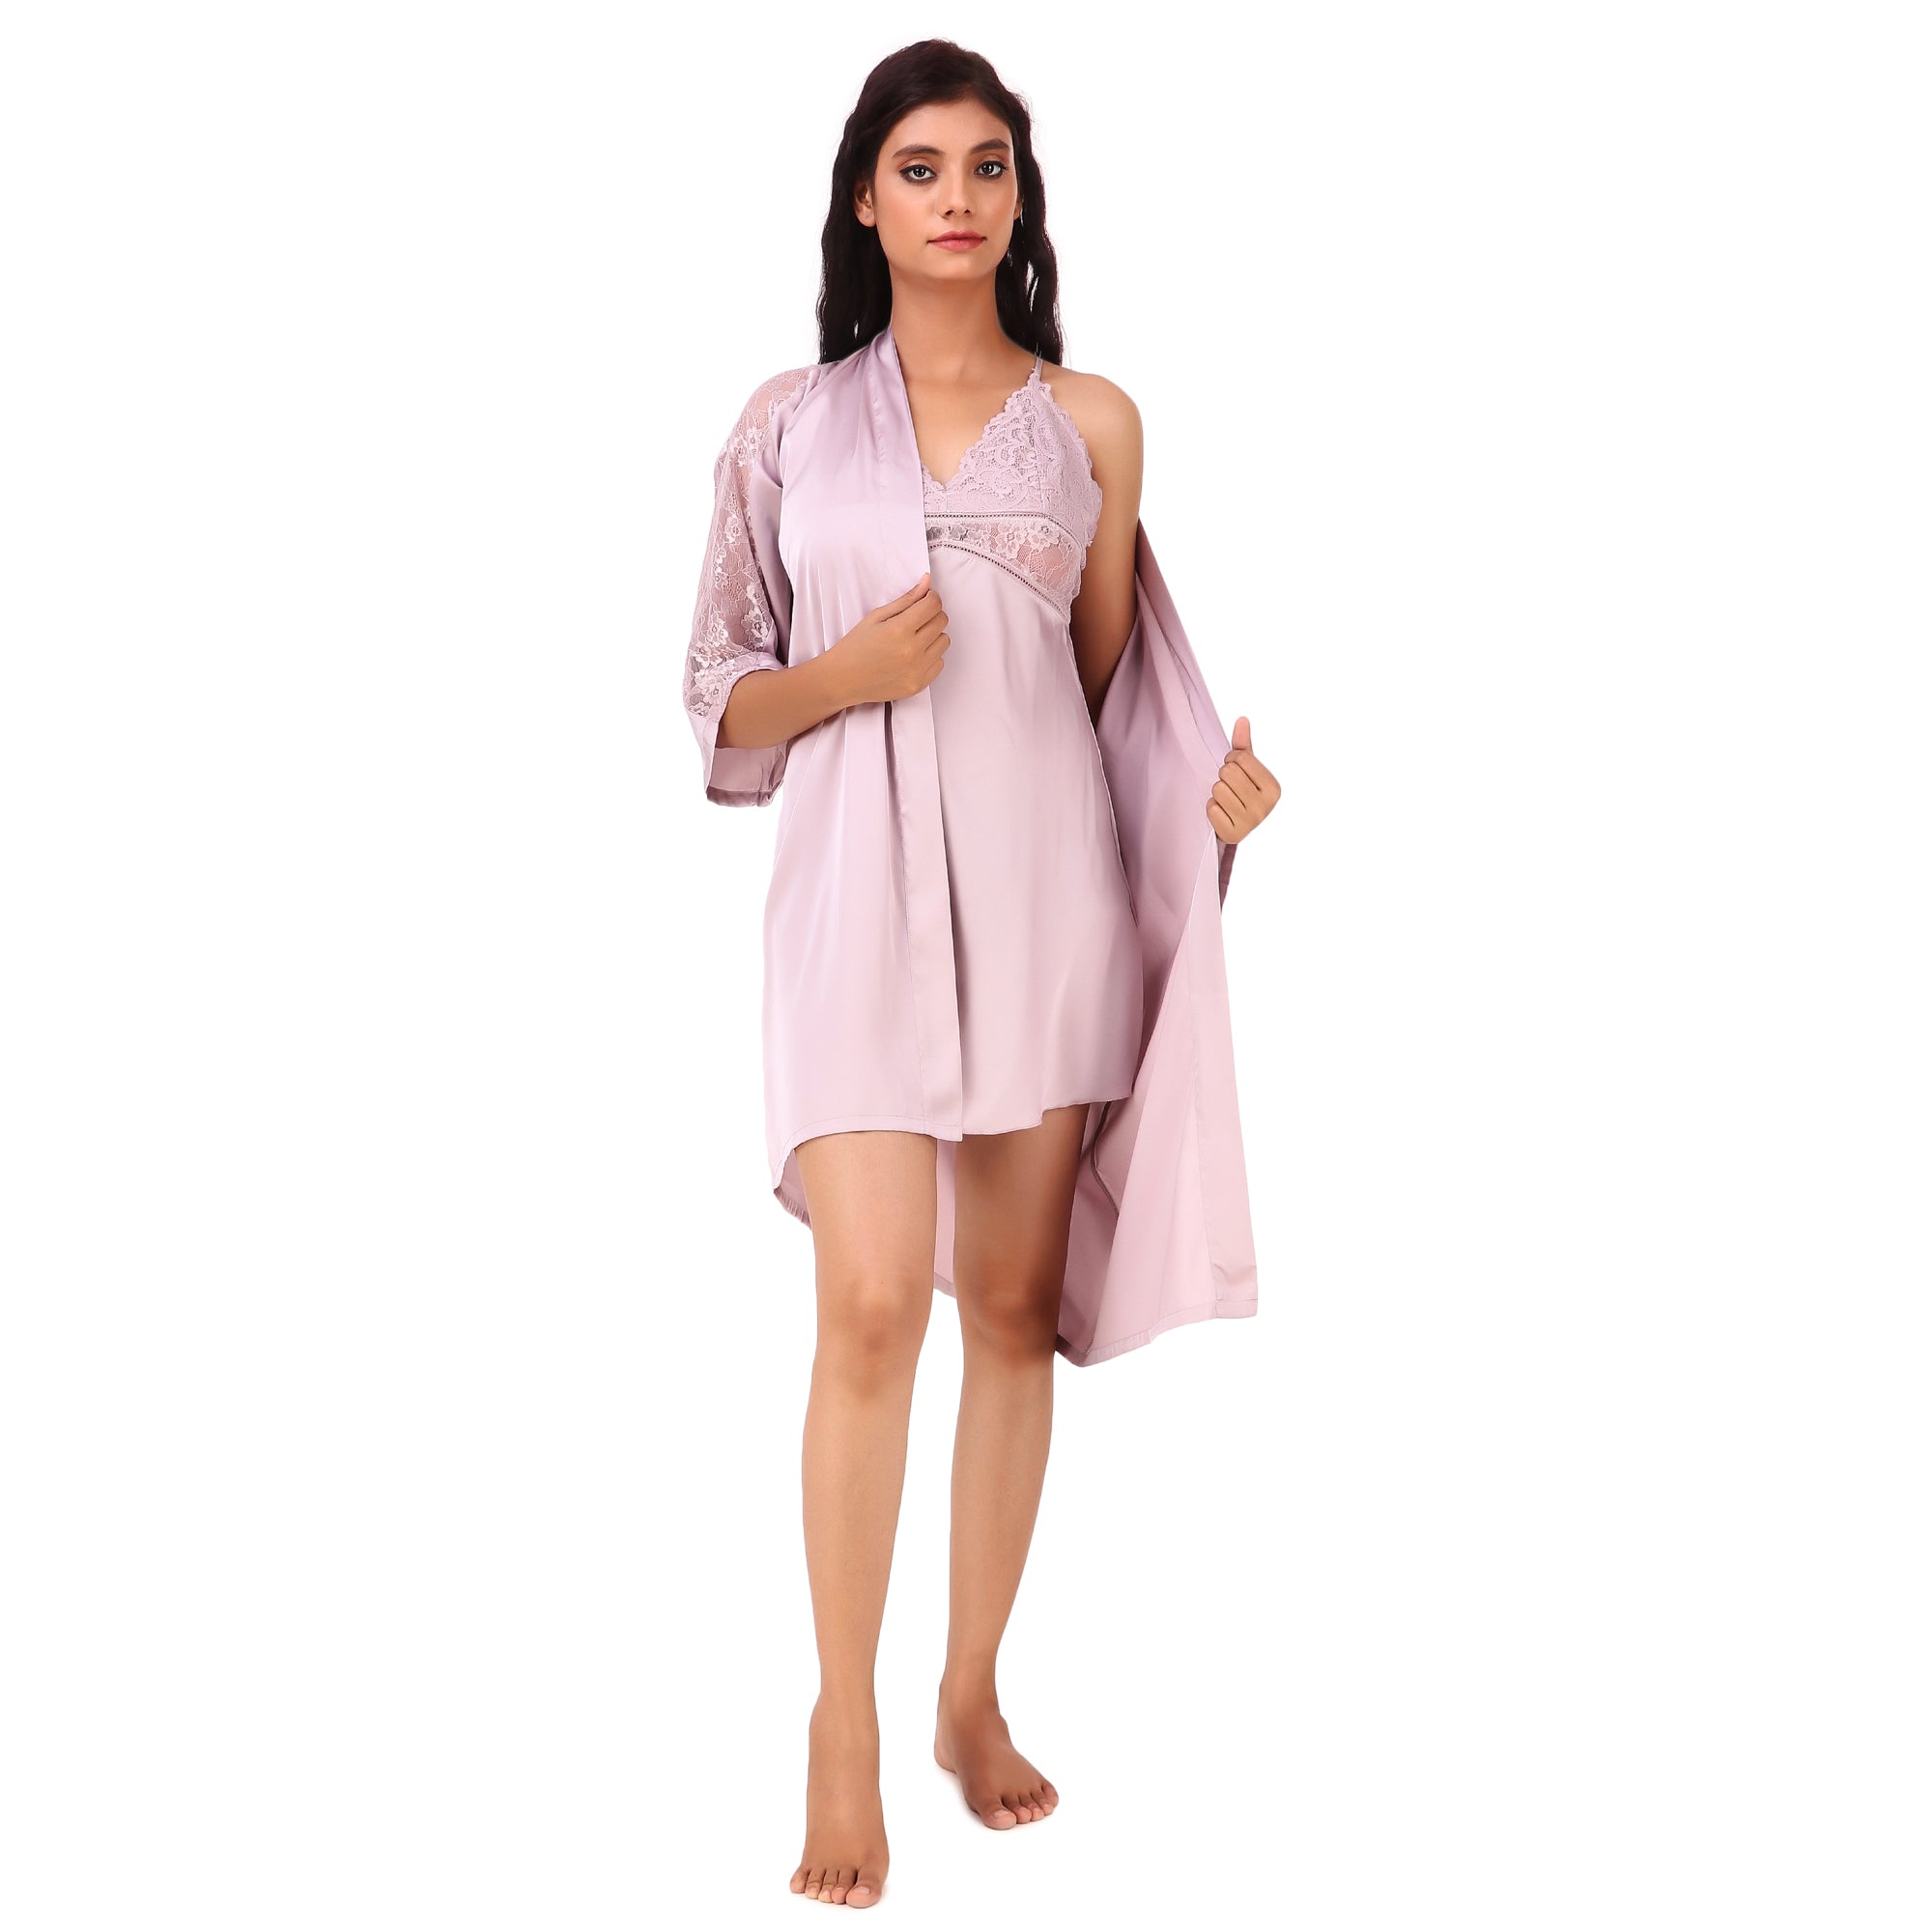 AXTZH-XNTS2P036   luxuriously Smooth satin Night Gown shorts set with soft lace Accents - 3 pcs set.